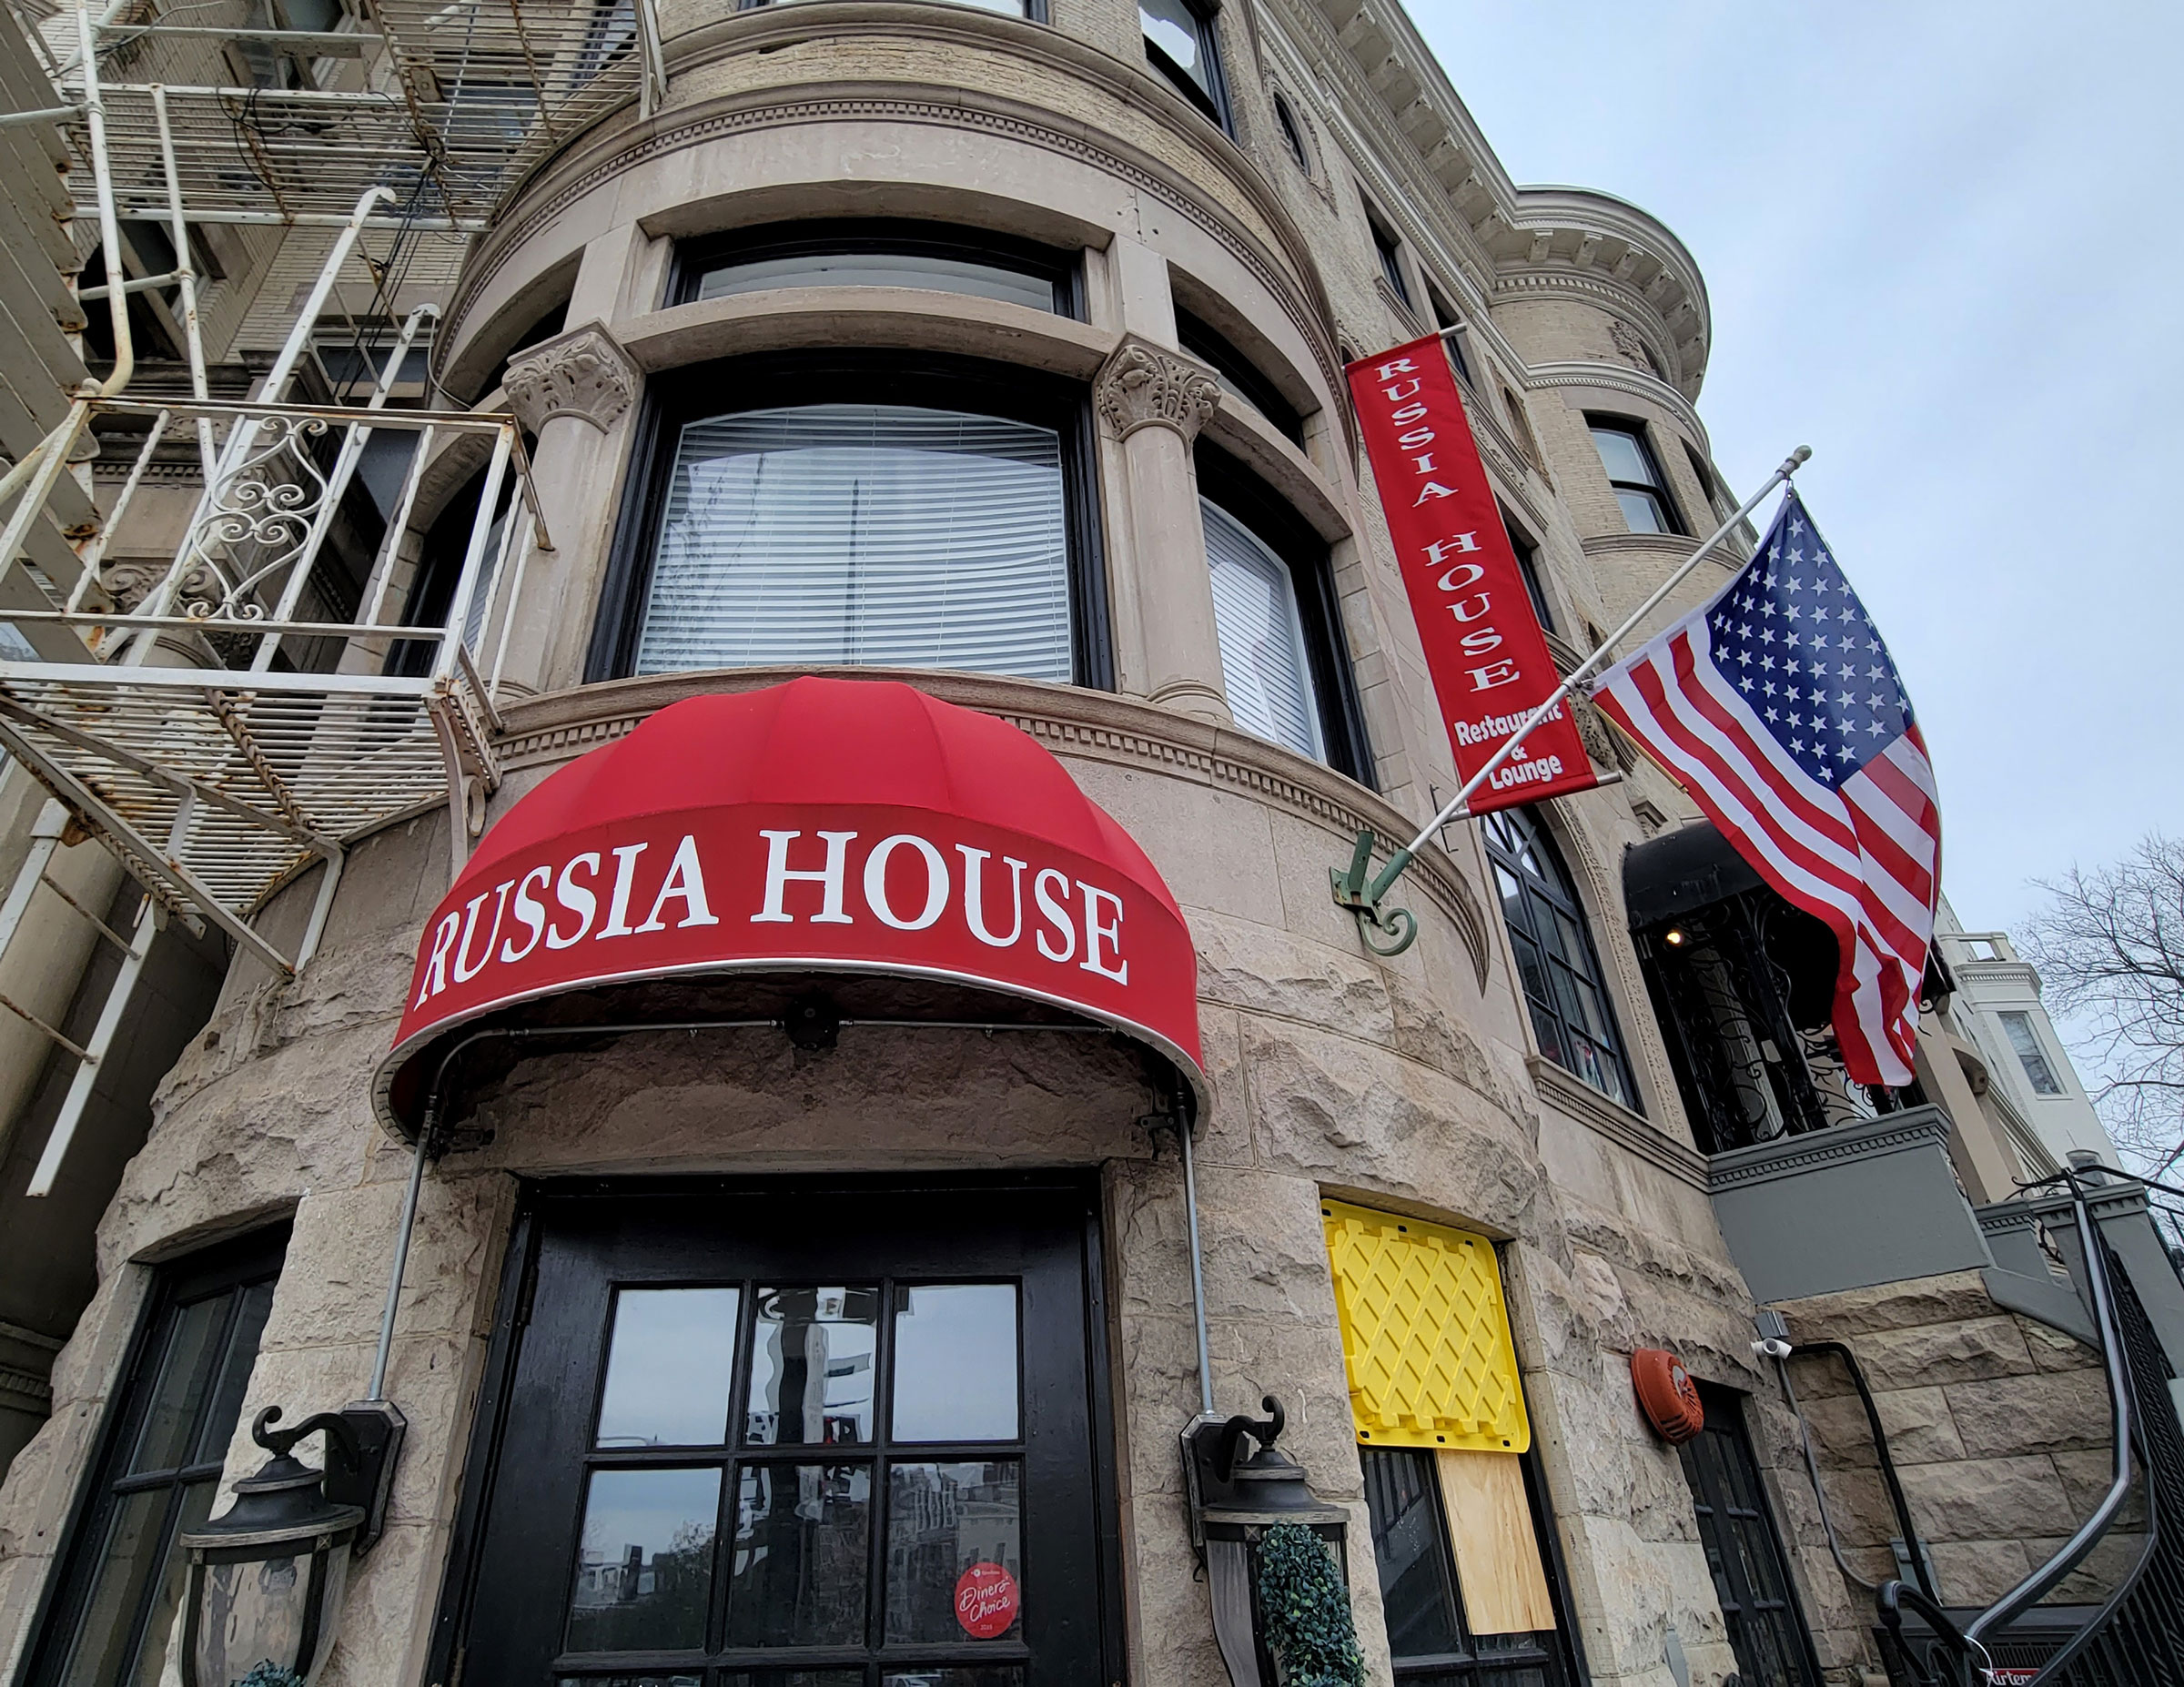 The Russia House bar and restaurant waves the American flag outside its entrance on Connecticut Avenue in Washington, DC on Tuesday, March 1, 2022. Vandals broke a window at lower right after the Russian invasion of Ukraine. (Pat Benic—UPI/Shutterstock)